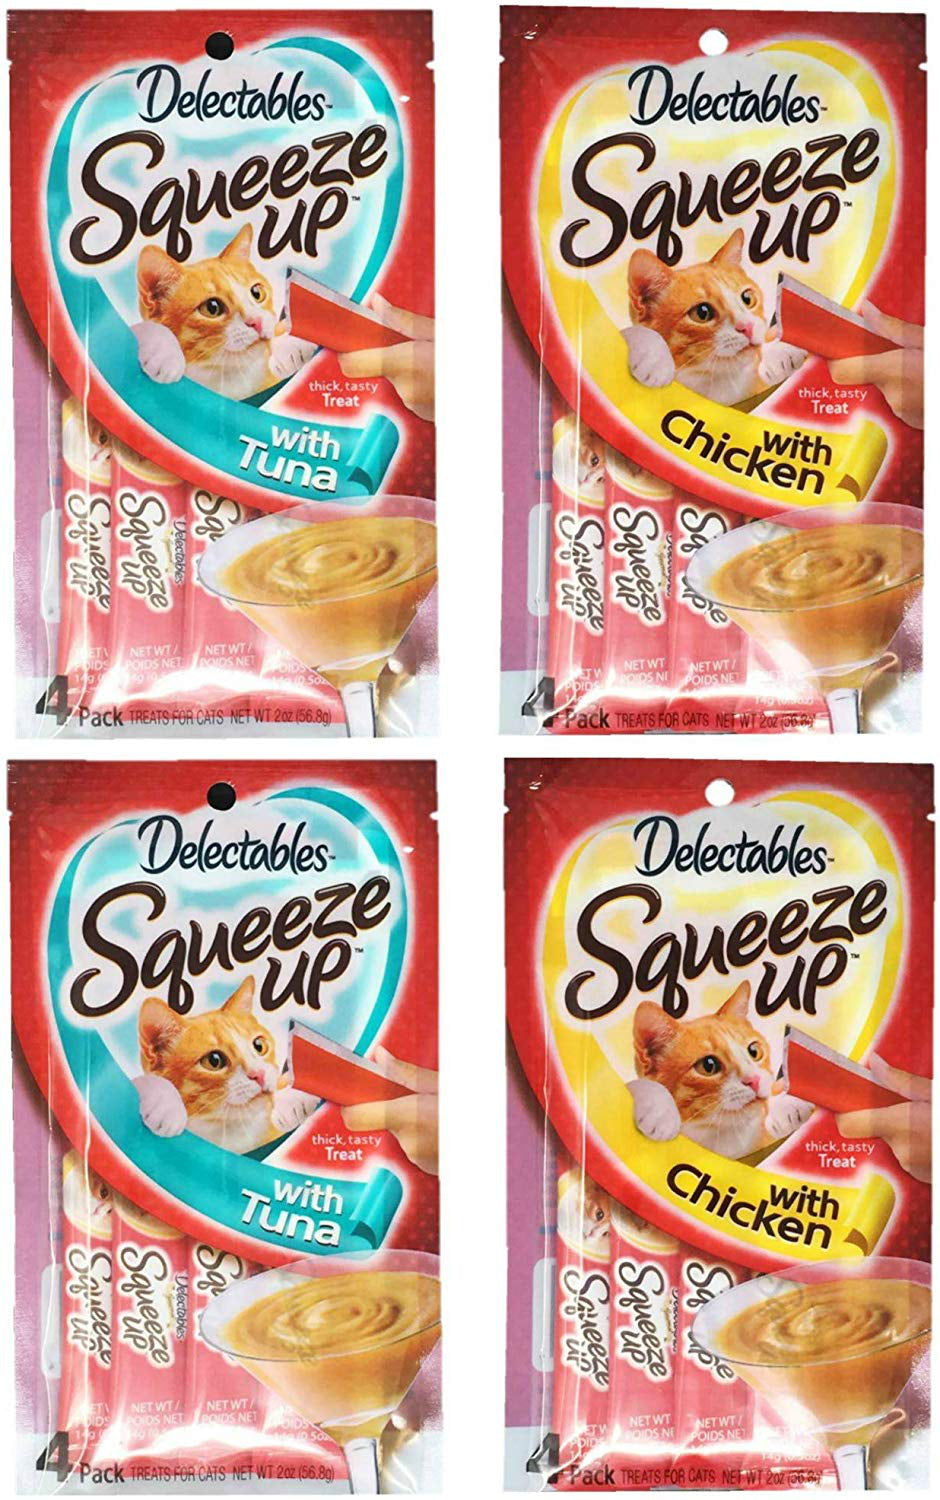 Hartz Delectables Squeeze up Lickable Treat Size:Pack of 6 Flavor:Assorted